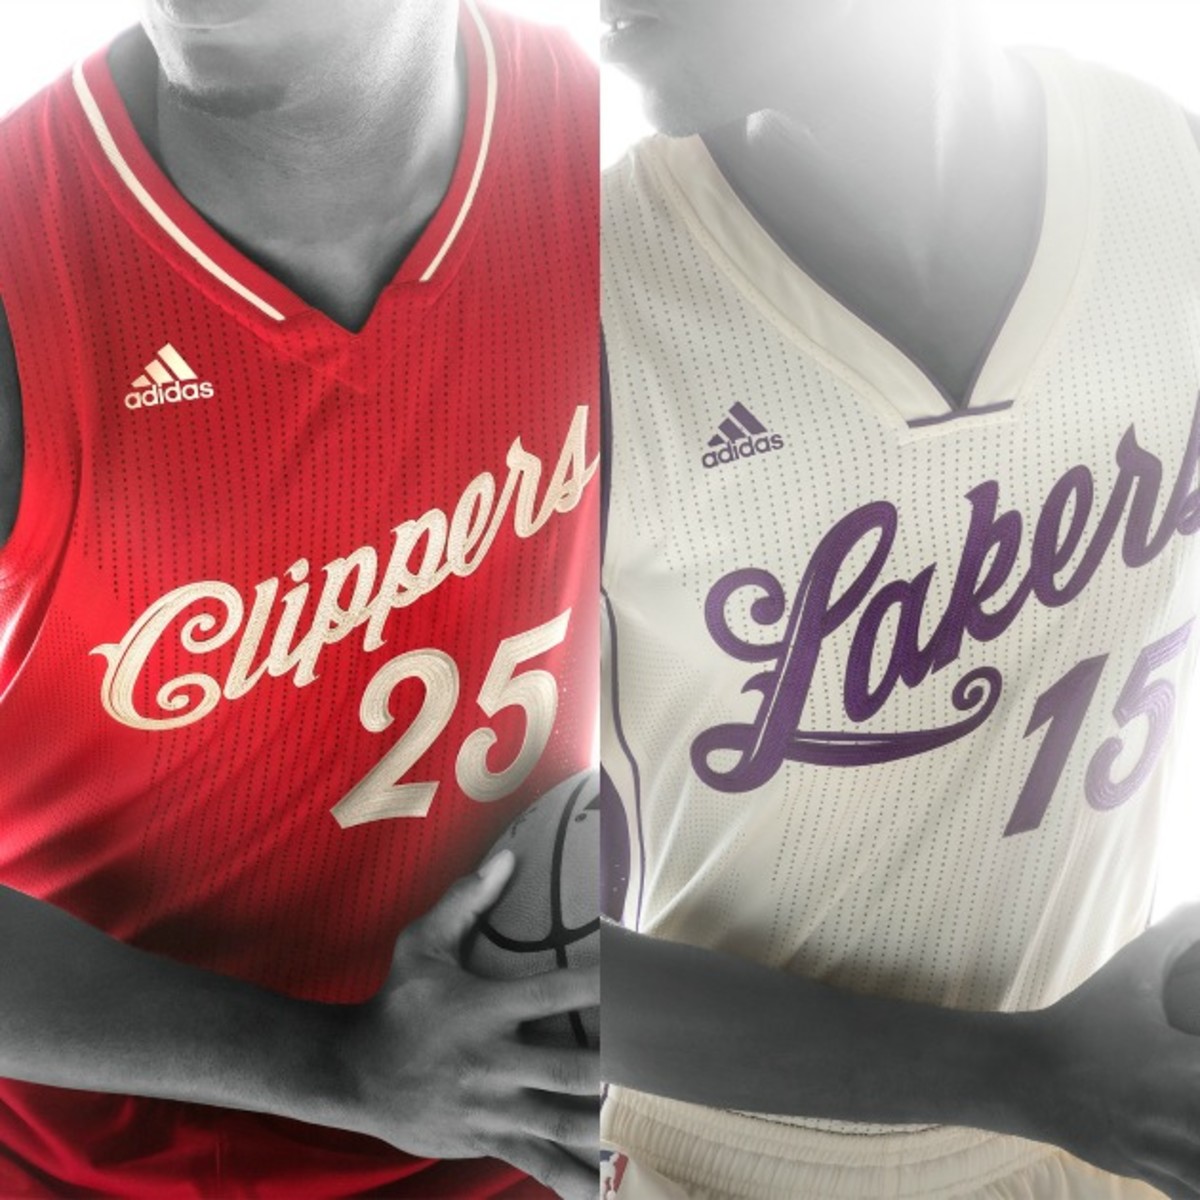 Hey, the NBA Christmas jerseys for 2015 aren't bad